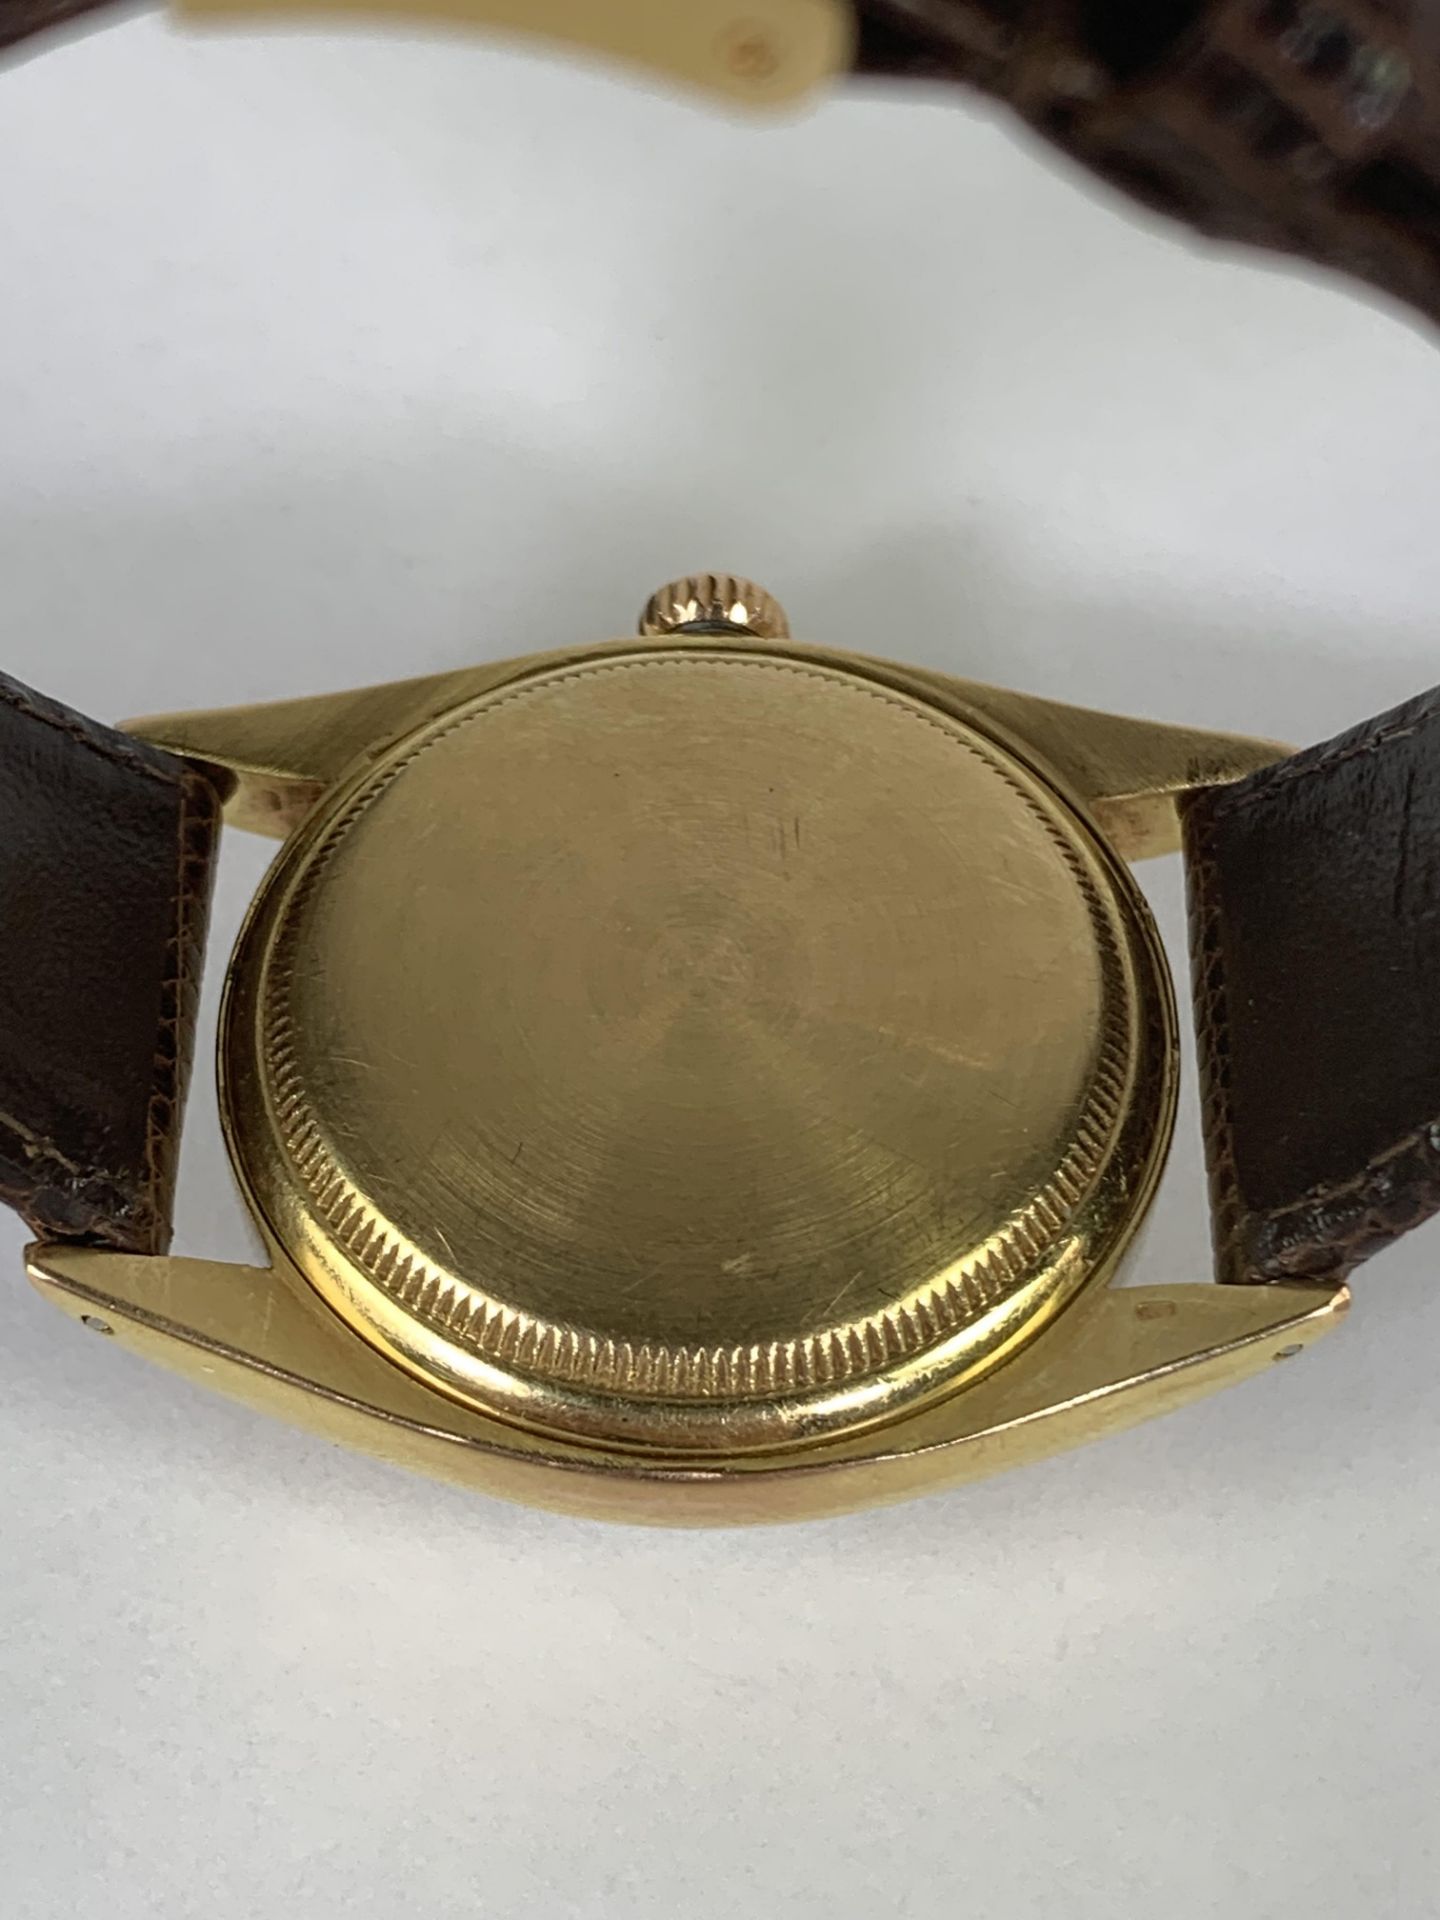 Extremely rare 1950's men's Rolex Oyster Perpetual ref 6029, crown 1951 - Image 8 of 16